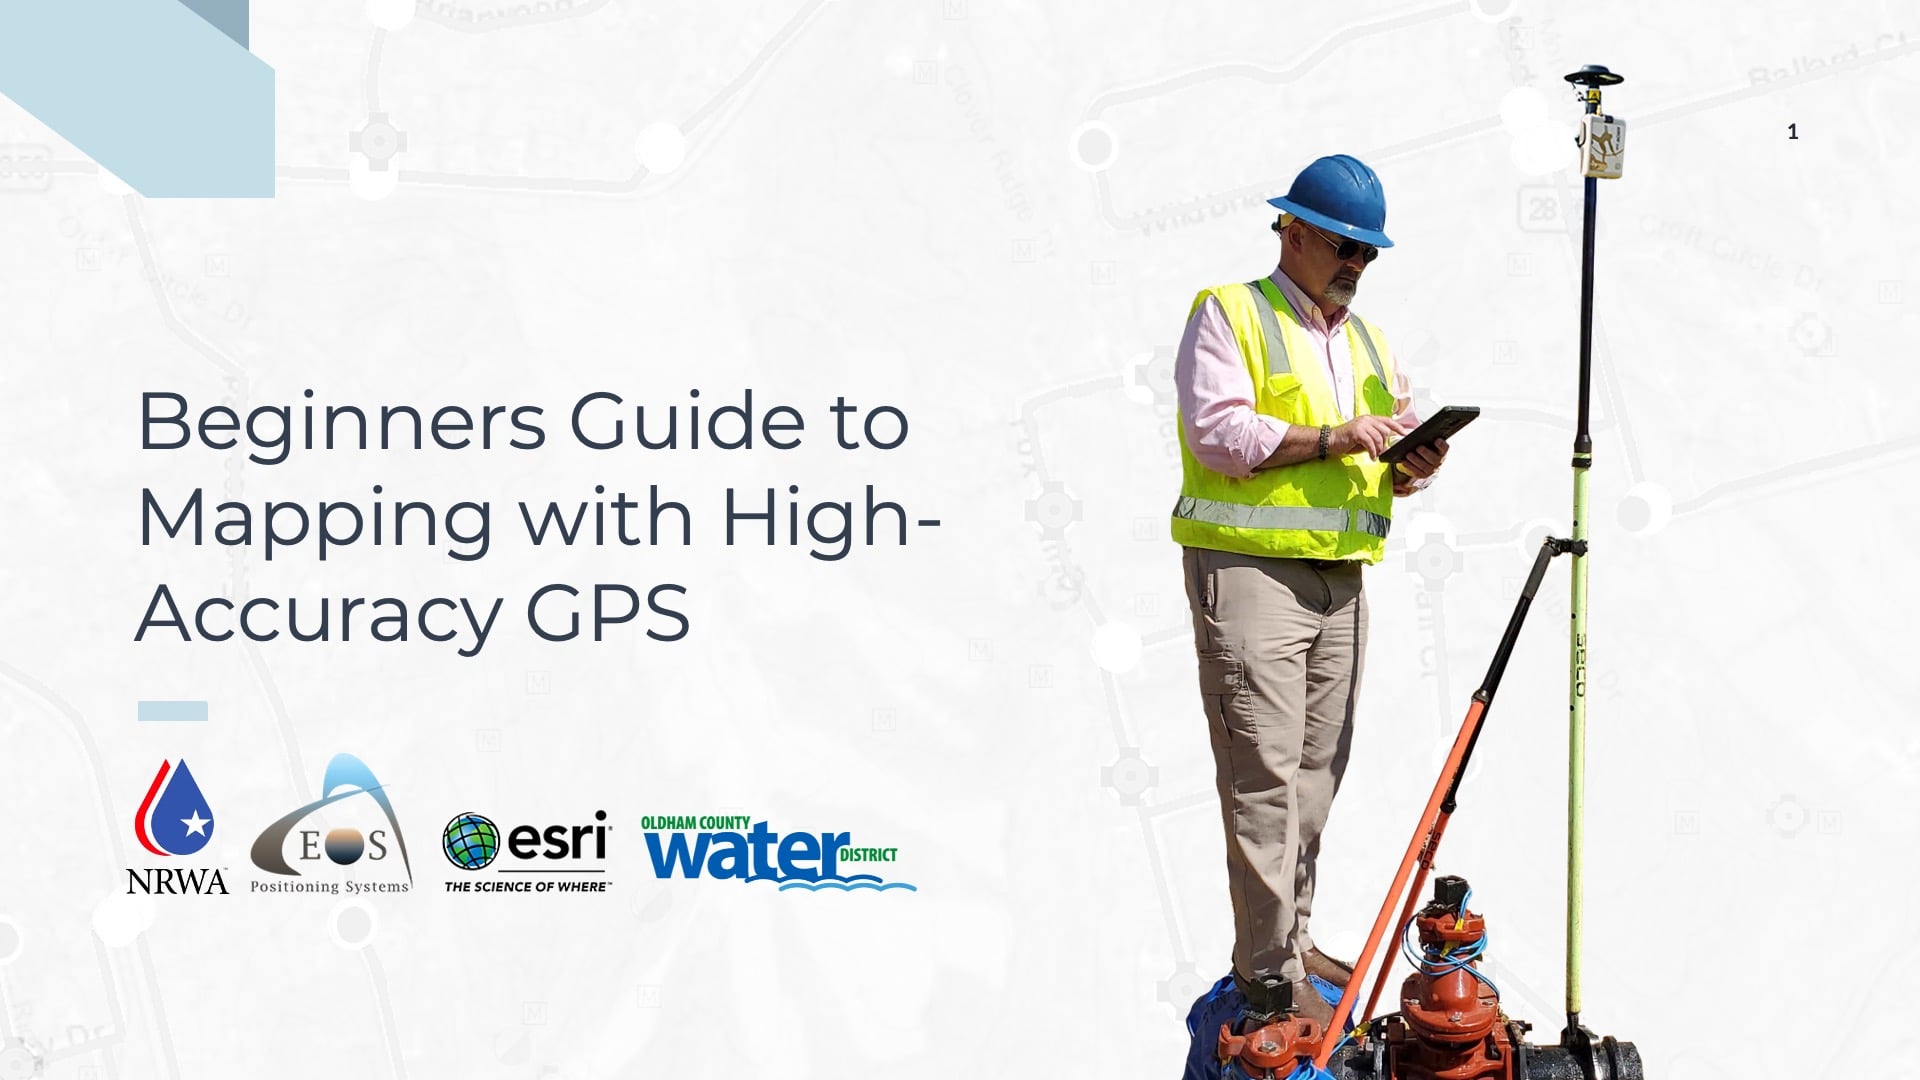 NRWA Eos Webinar: Beginners Guide to Mapping wiht High-Accuracy GPS